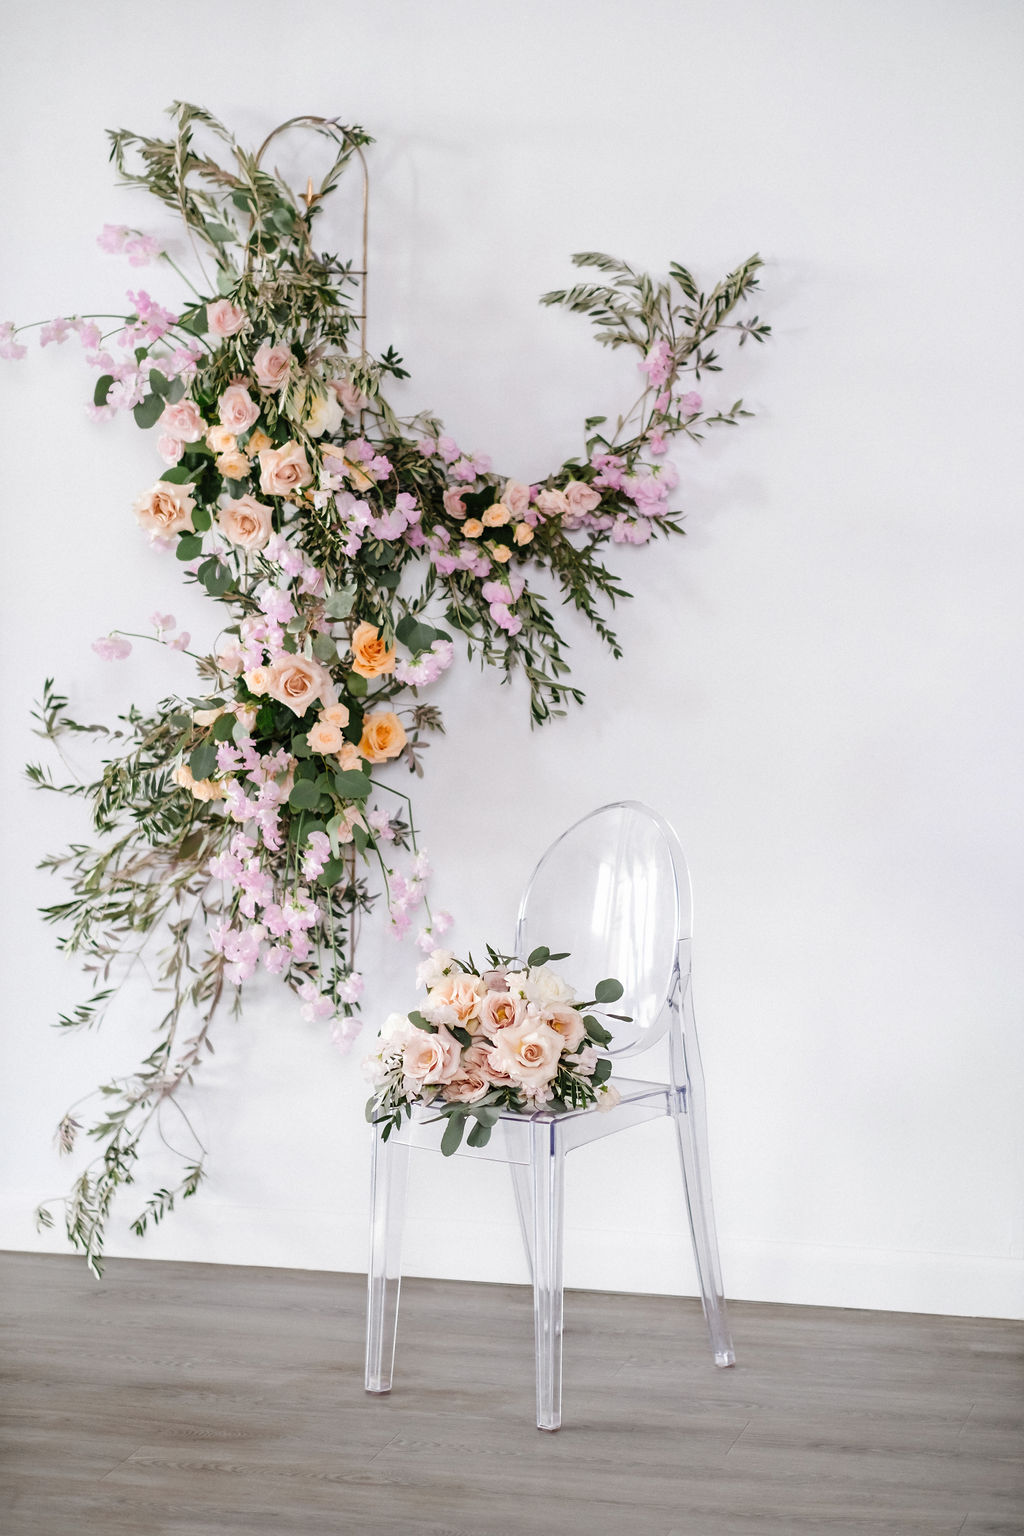 Modern transparent chair at Venue 308 styled with orange and pink flowers